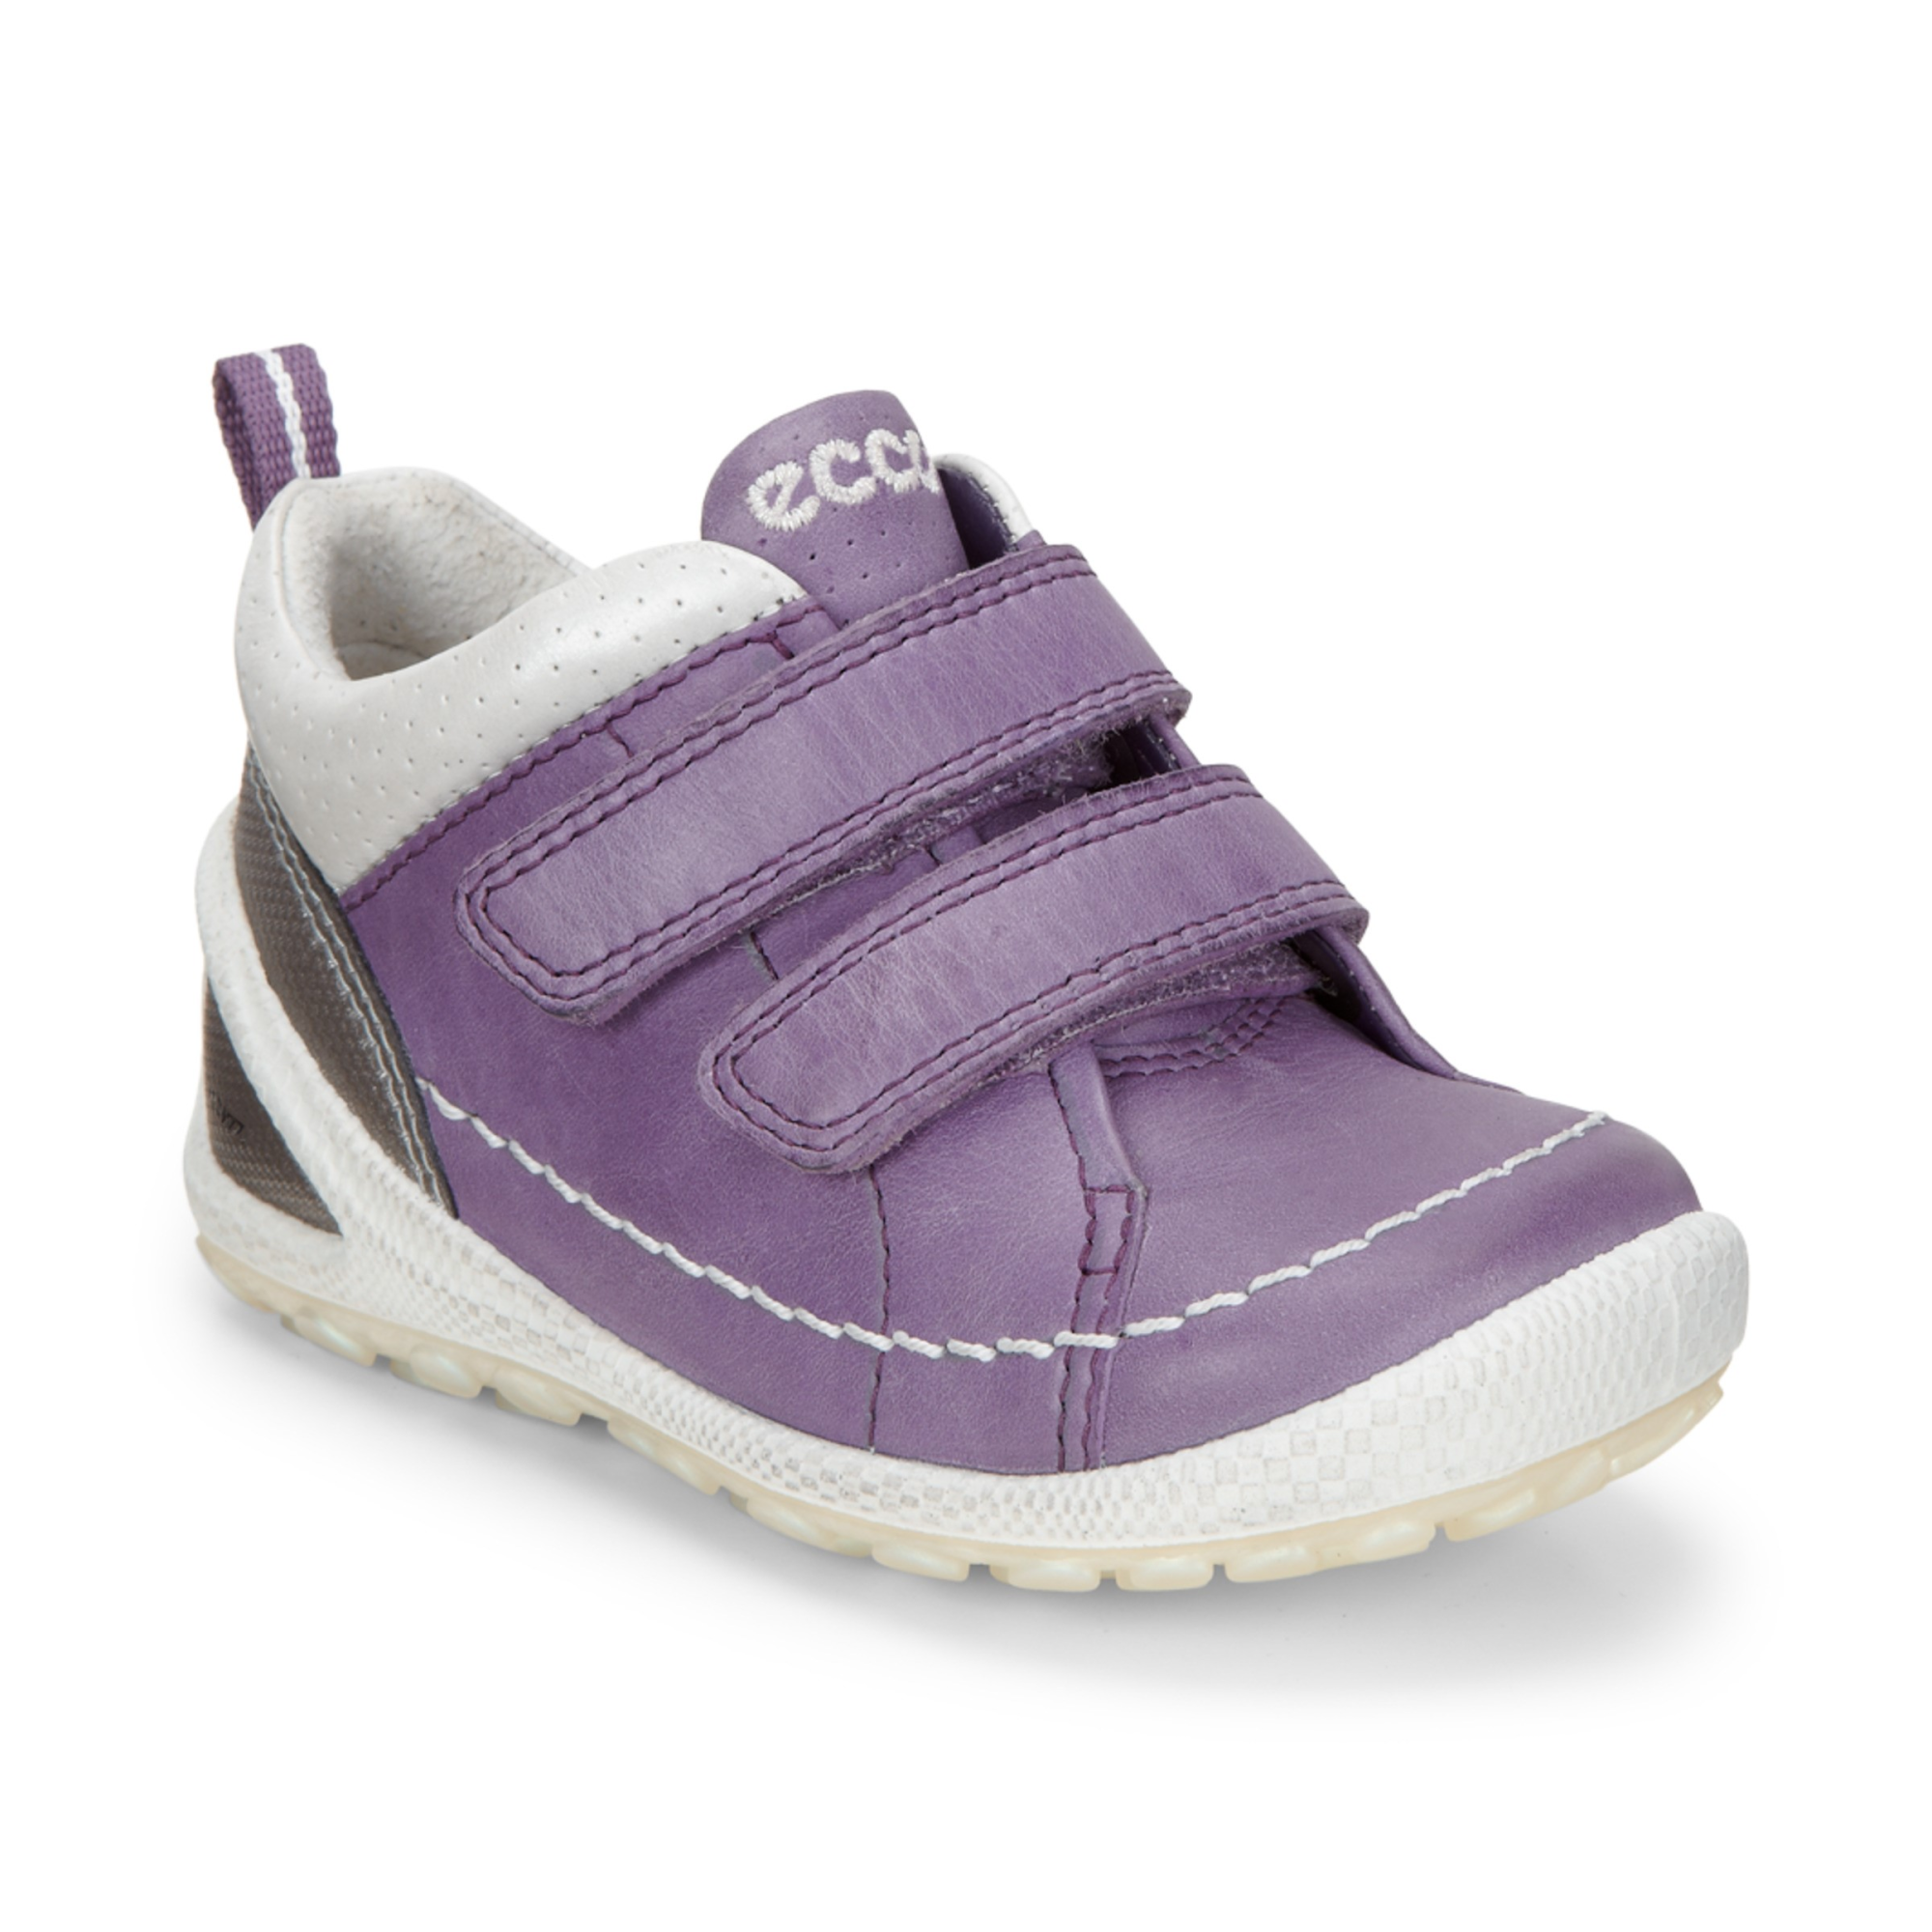 Ecco BIOM Lite Infants 21 - Products - Veryk Mall - Veryk Mall, many product, quick safe your money!